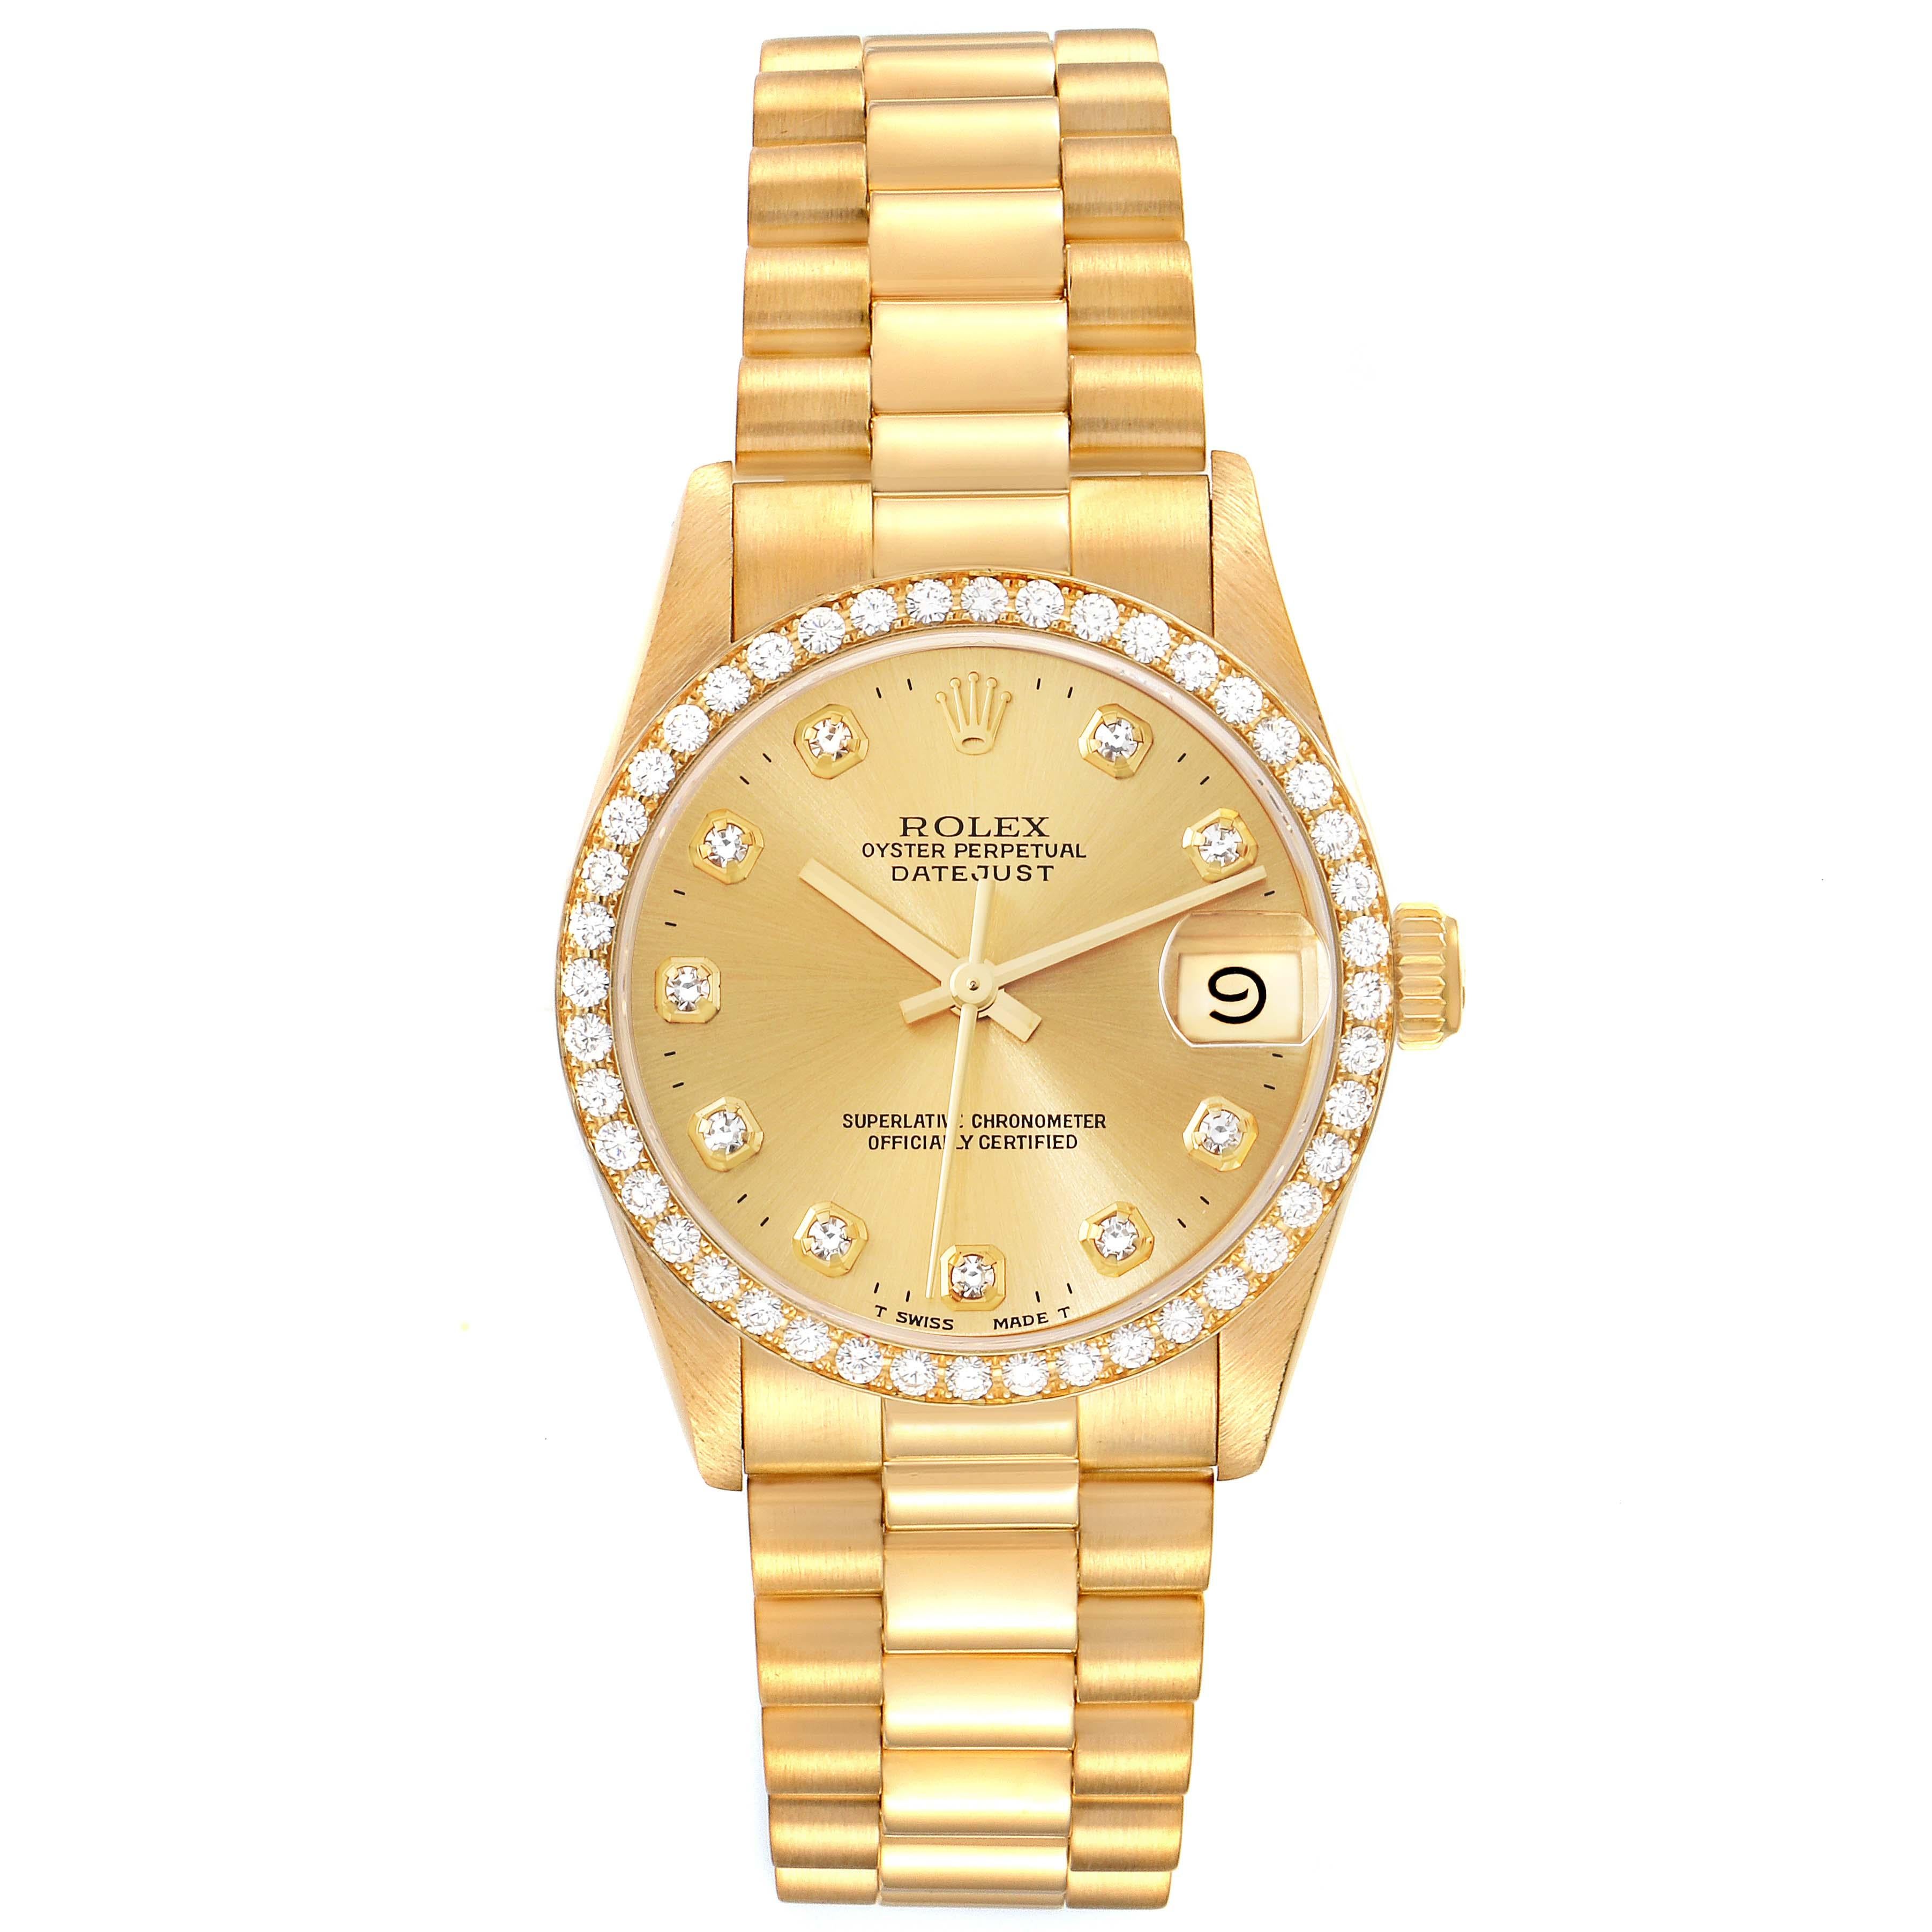 Rolex President Datejust 31 Midsize Yellow Gold Diamond Ladies Watch 68288. Officially certified chronometer automatic self-winding movement. 18k yellow gold oyster case 31.0 mm in diameter. Rolex logo on a crown. Original Rolex factory diamond